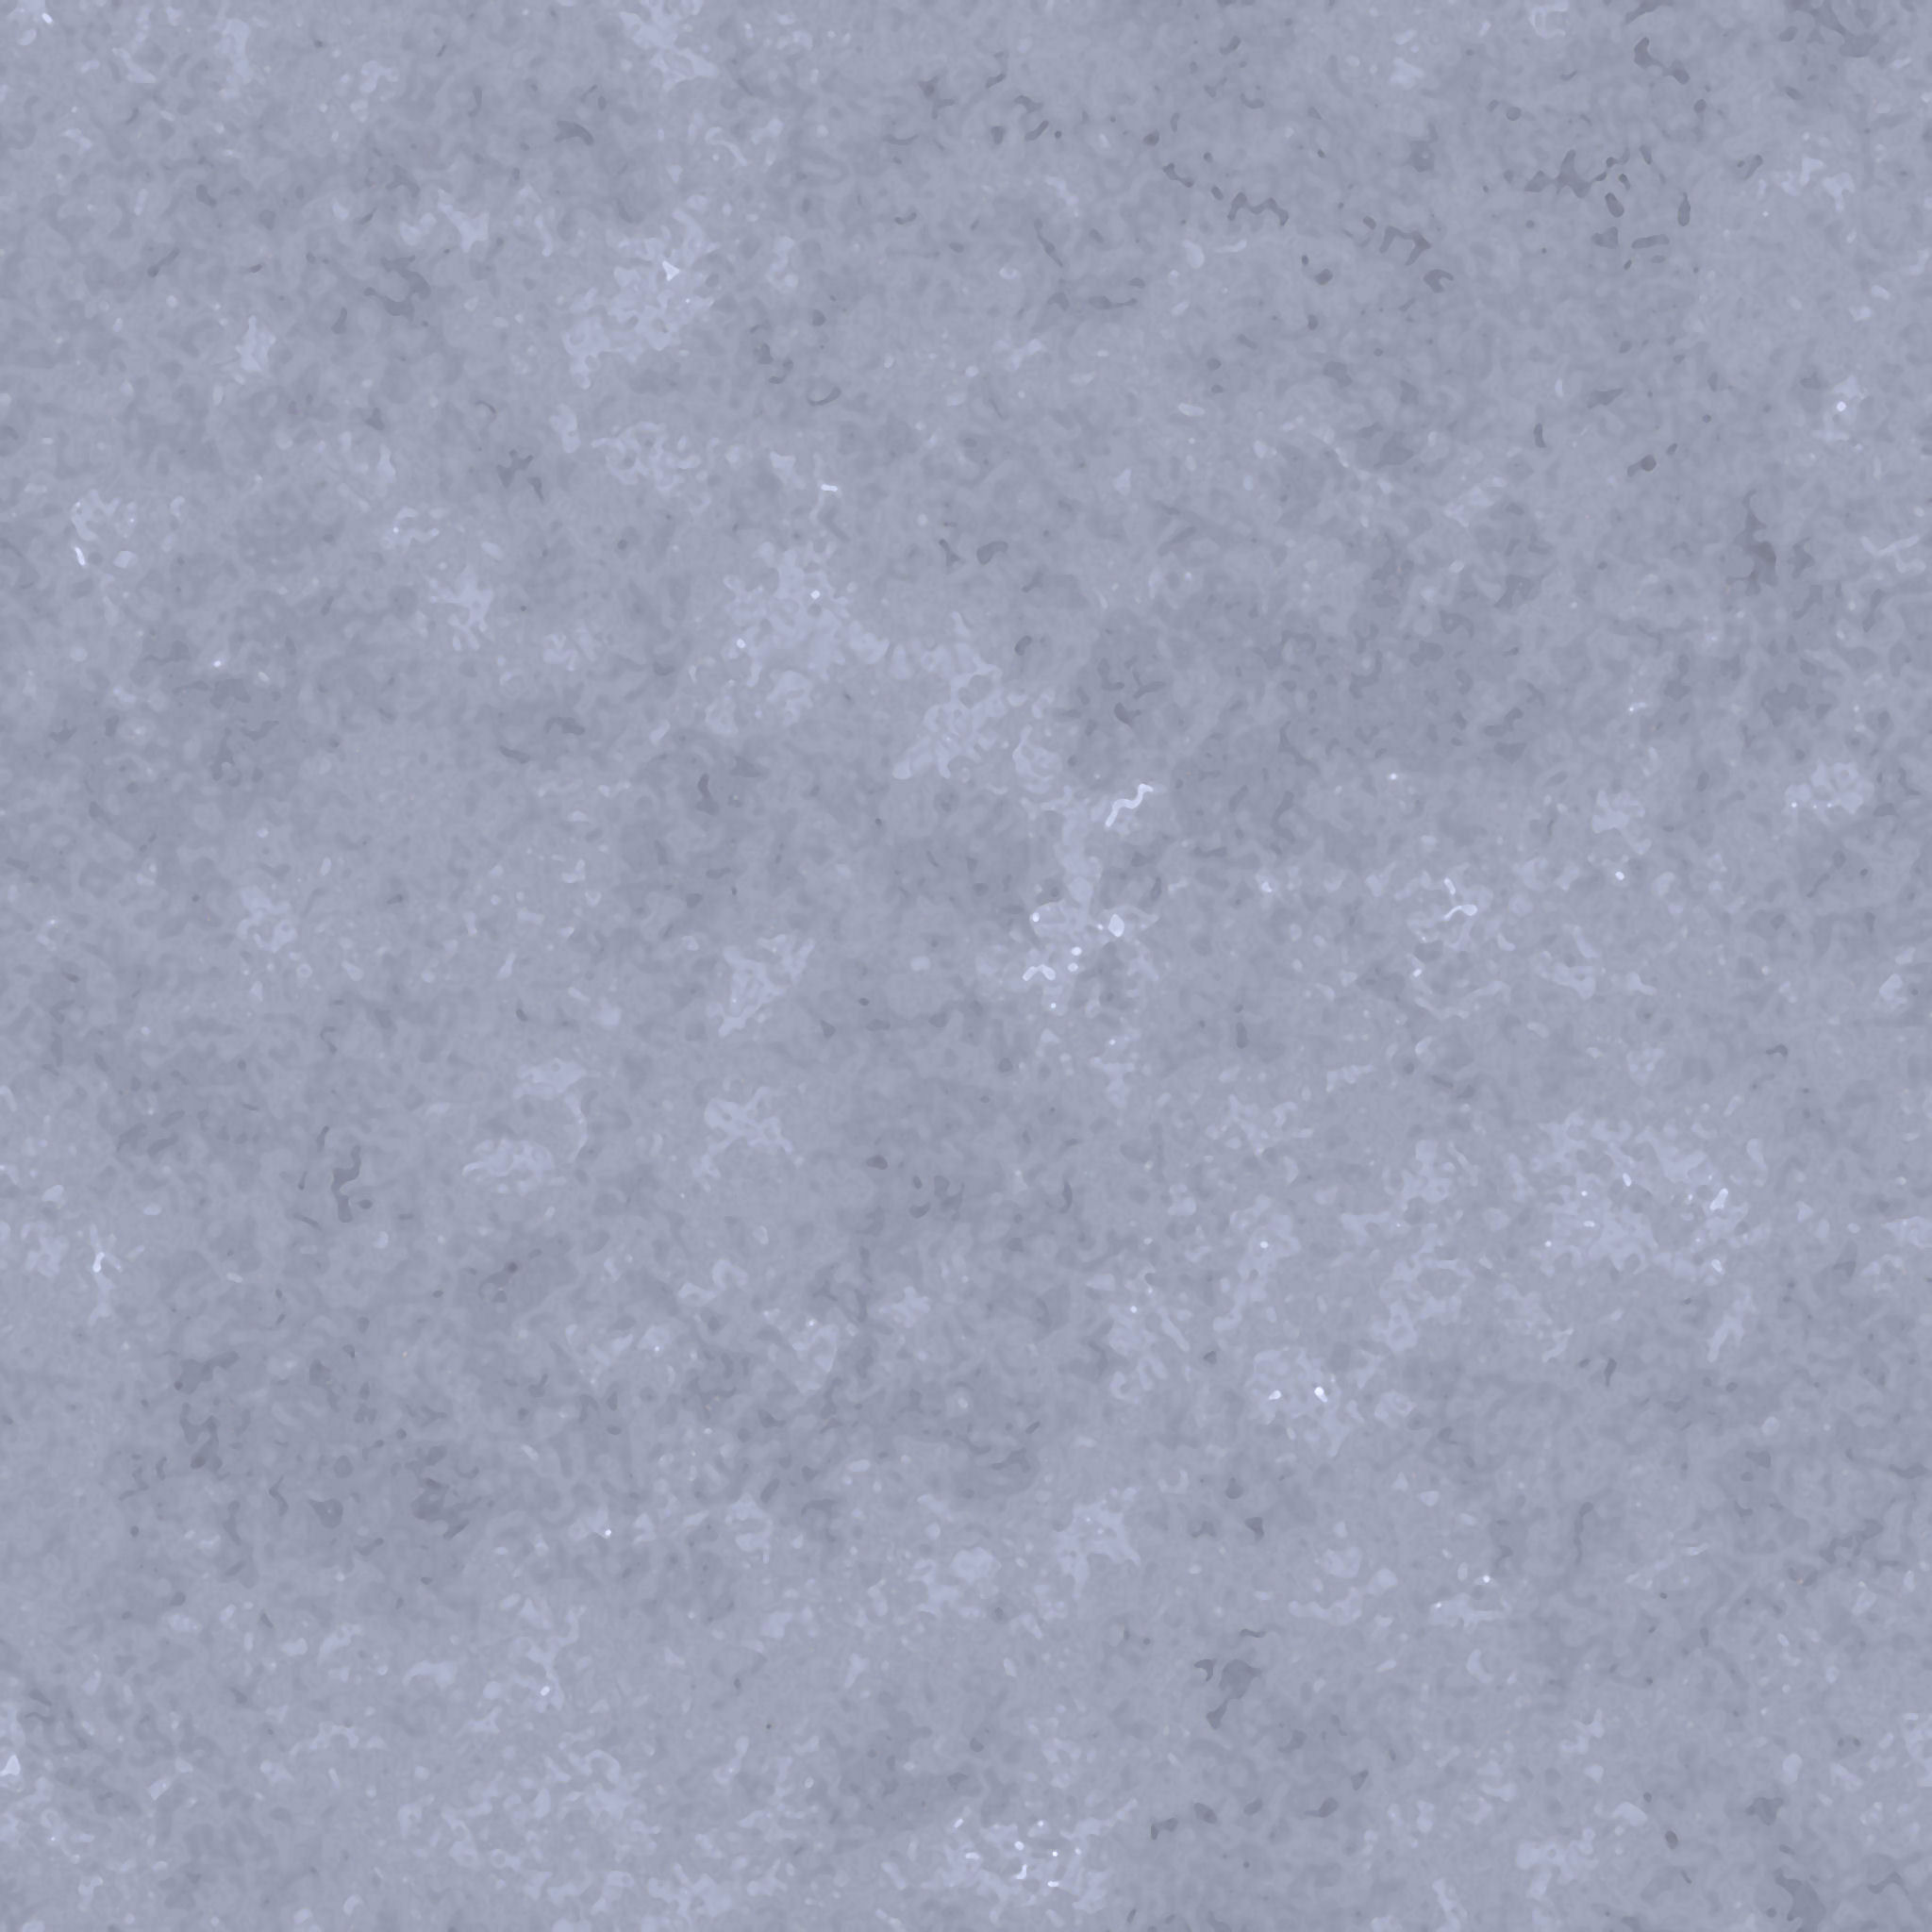 Seamless grey smooth concrete stone texture by hhh316 on DeviantArt